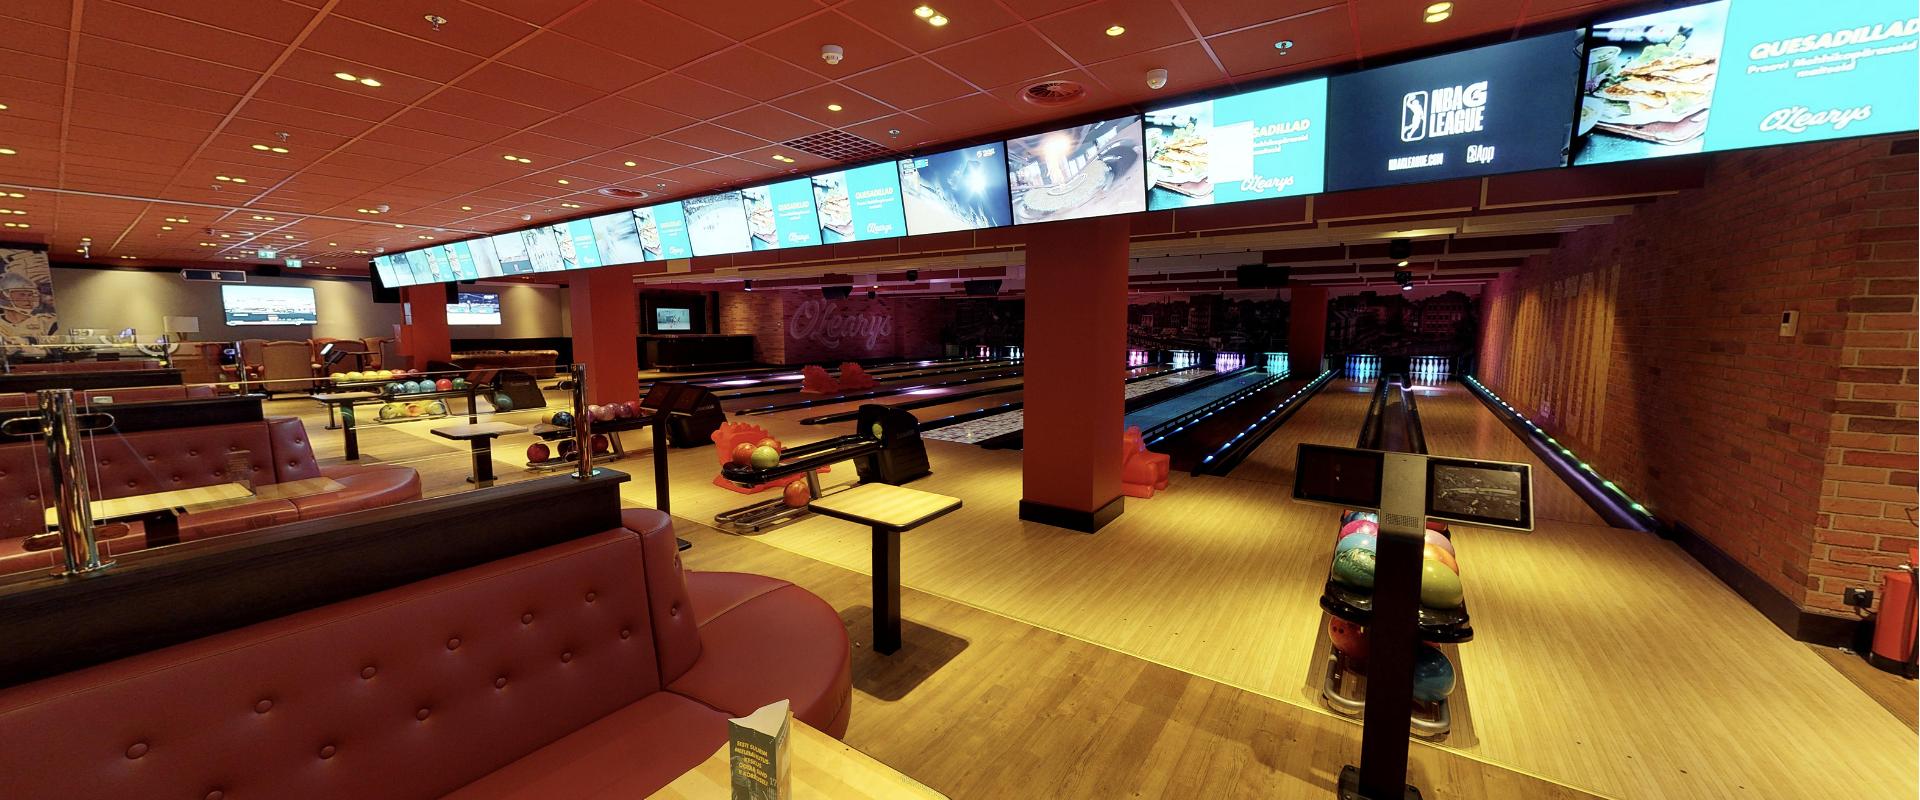 Bowling at the O’Learys Entertainment Centre in Kristiine Centre